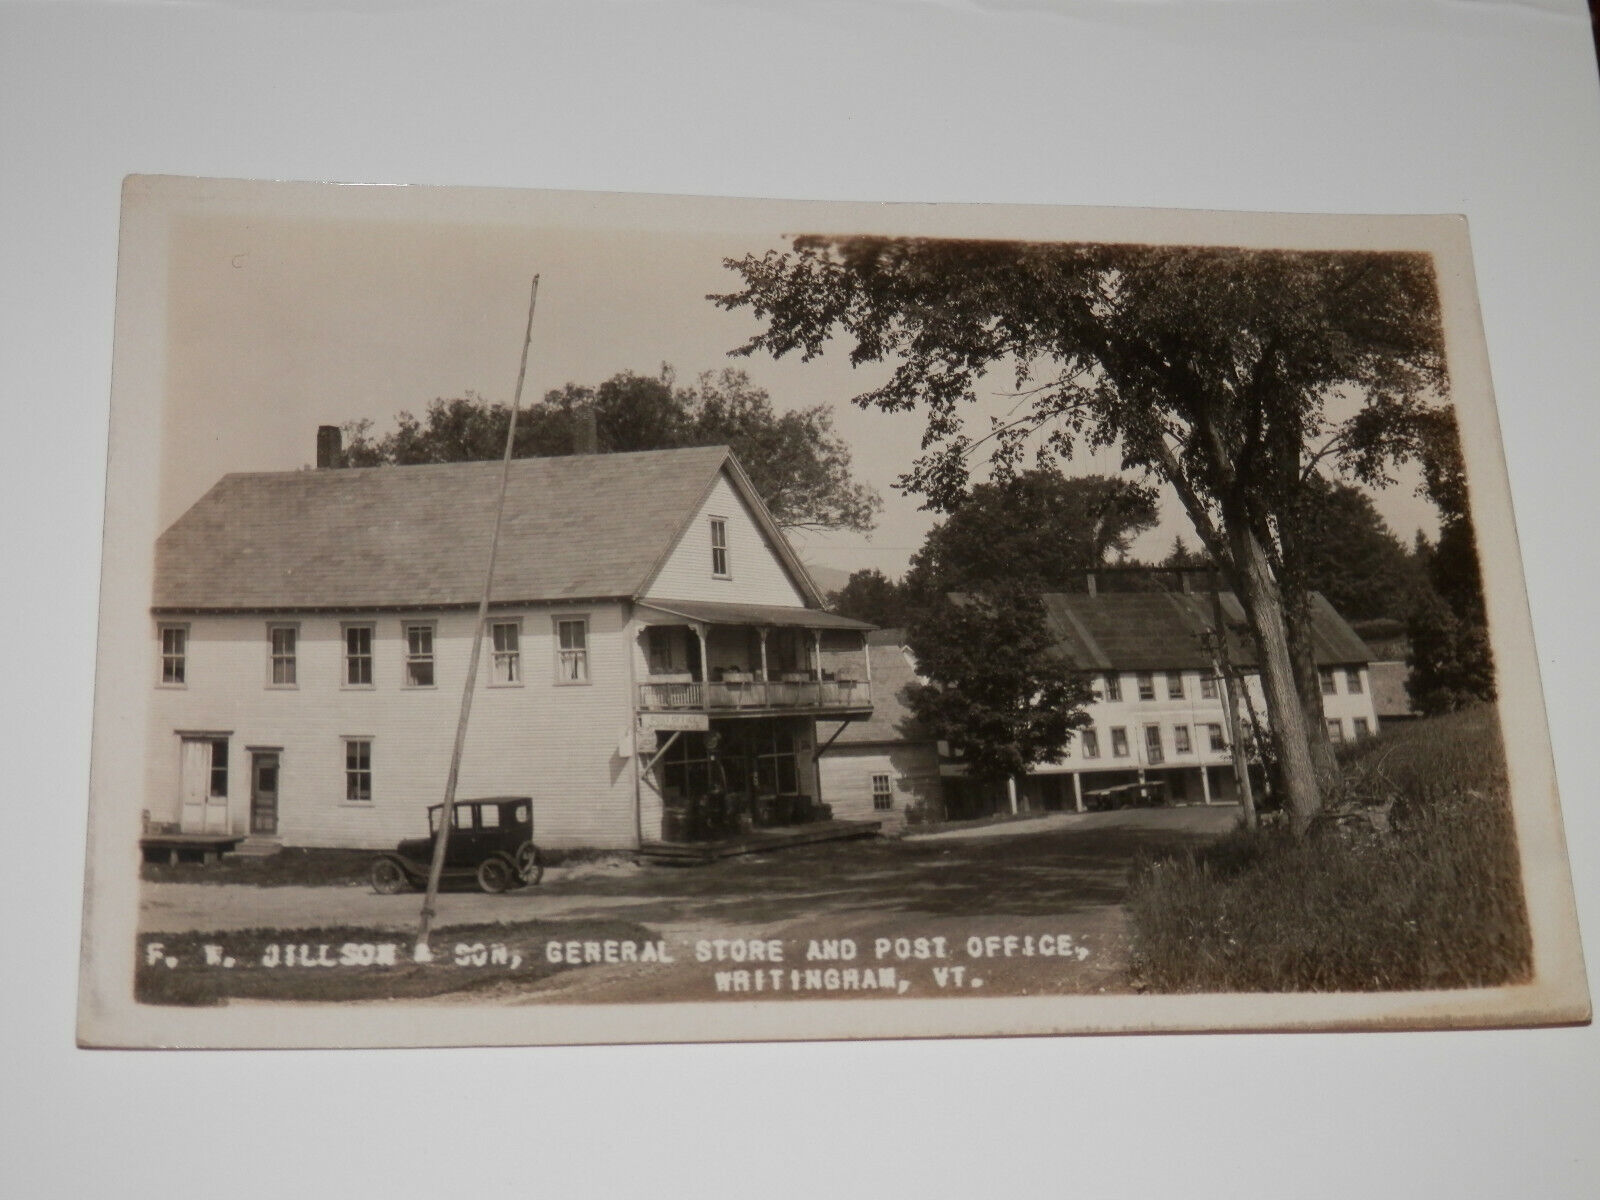 WHITINGHAM VT - REAL PHOTO POSTCARD RPPC - 1920-1945 ERA - STORE and POST OFFICE